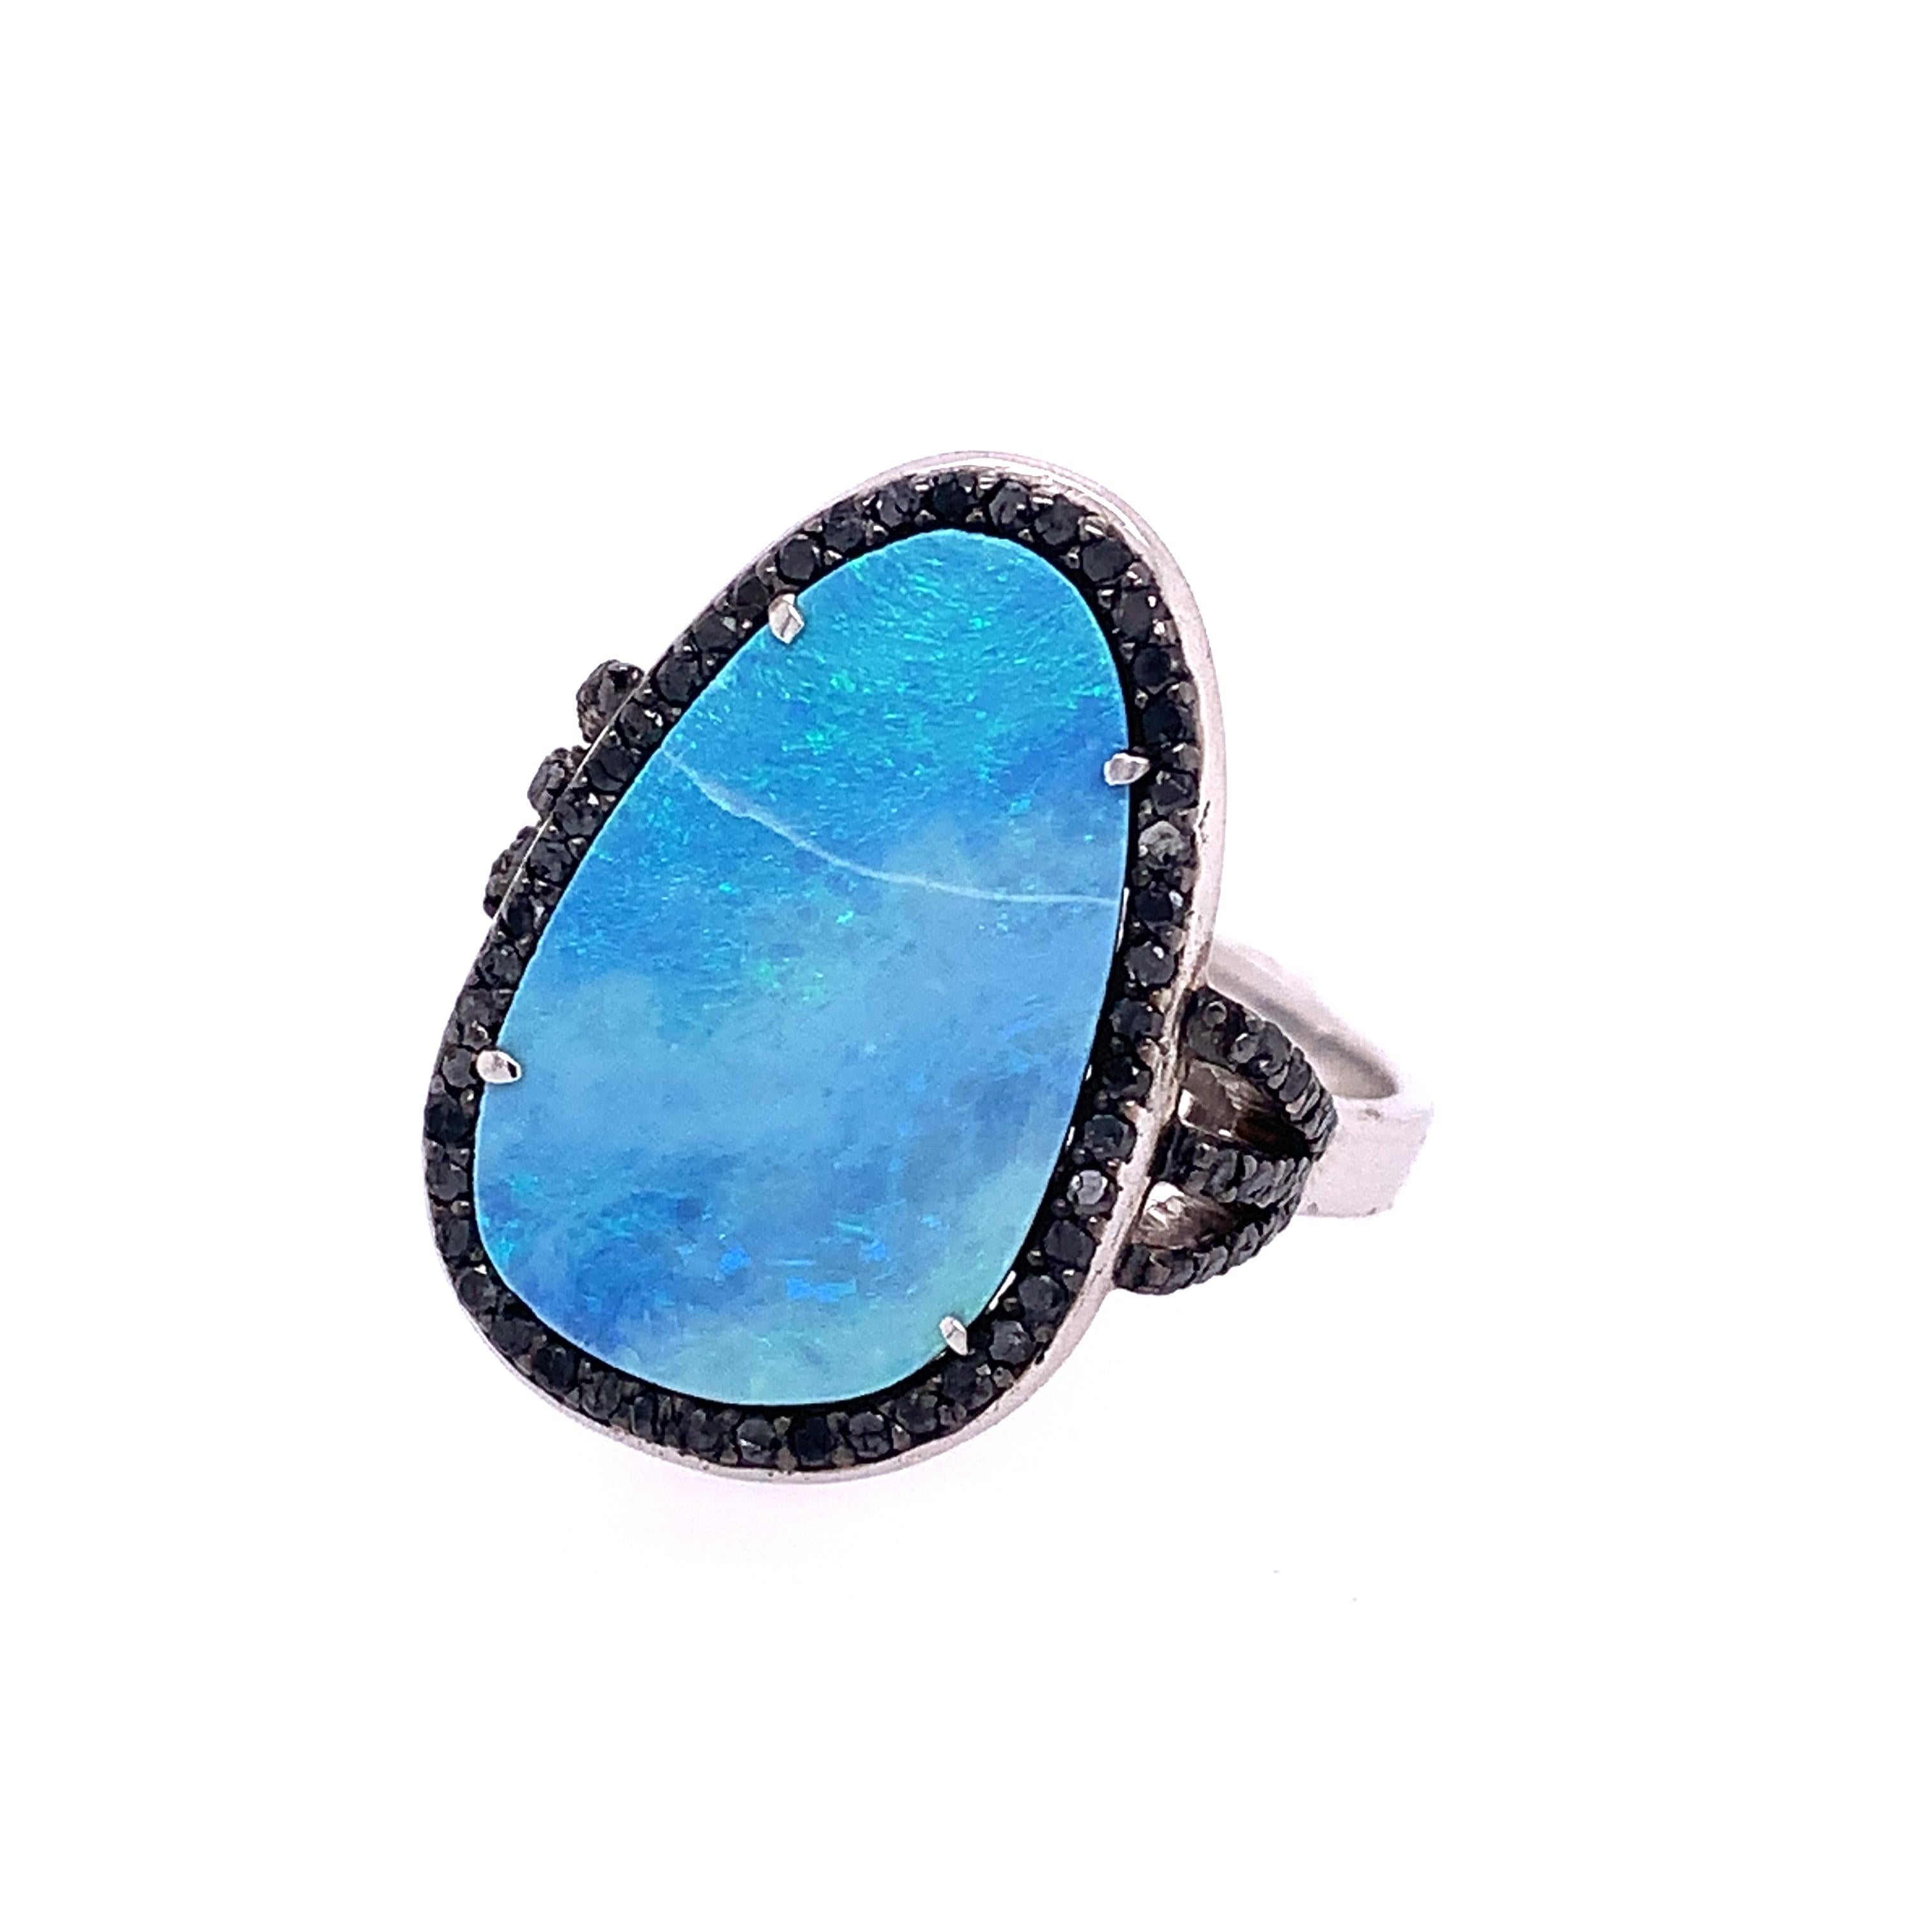 Life in color Collection

Australian Blue Opal accented by black Diamonds Cocktail ring set in Sterling Silver.

Opal: 4.84ct total weight.
Black Diamond: 0.58ct total weight.